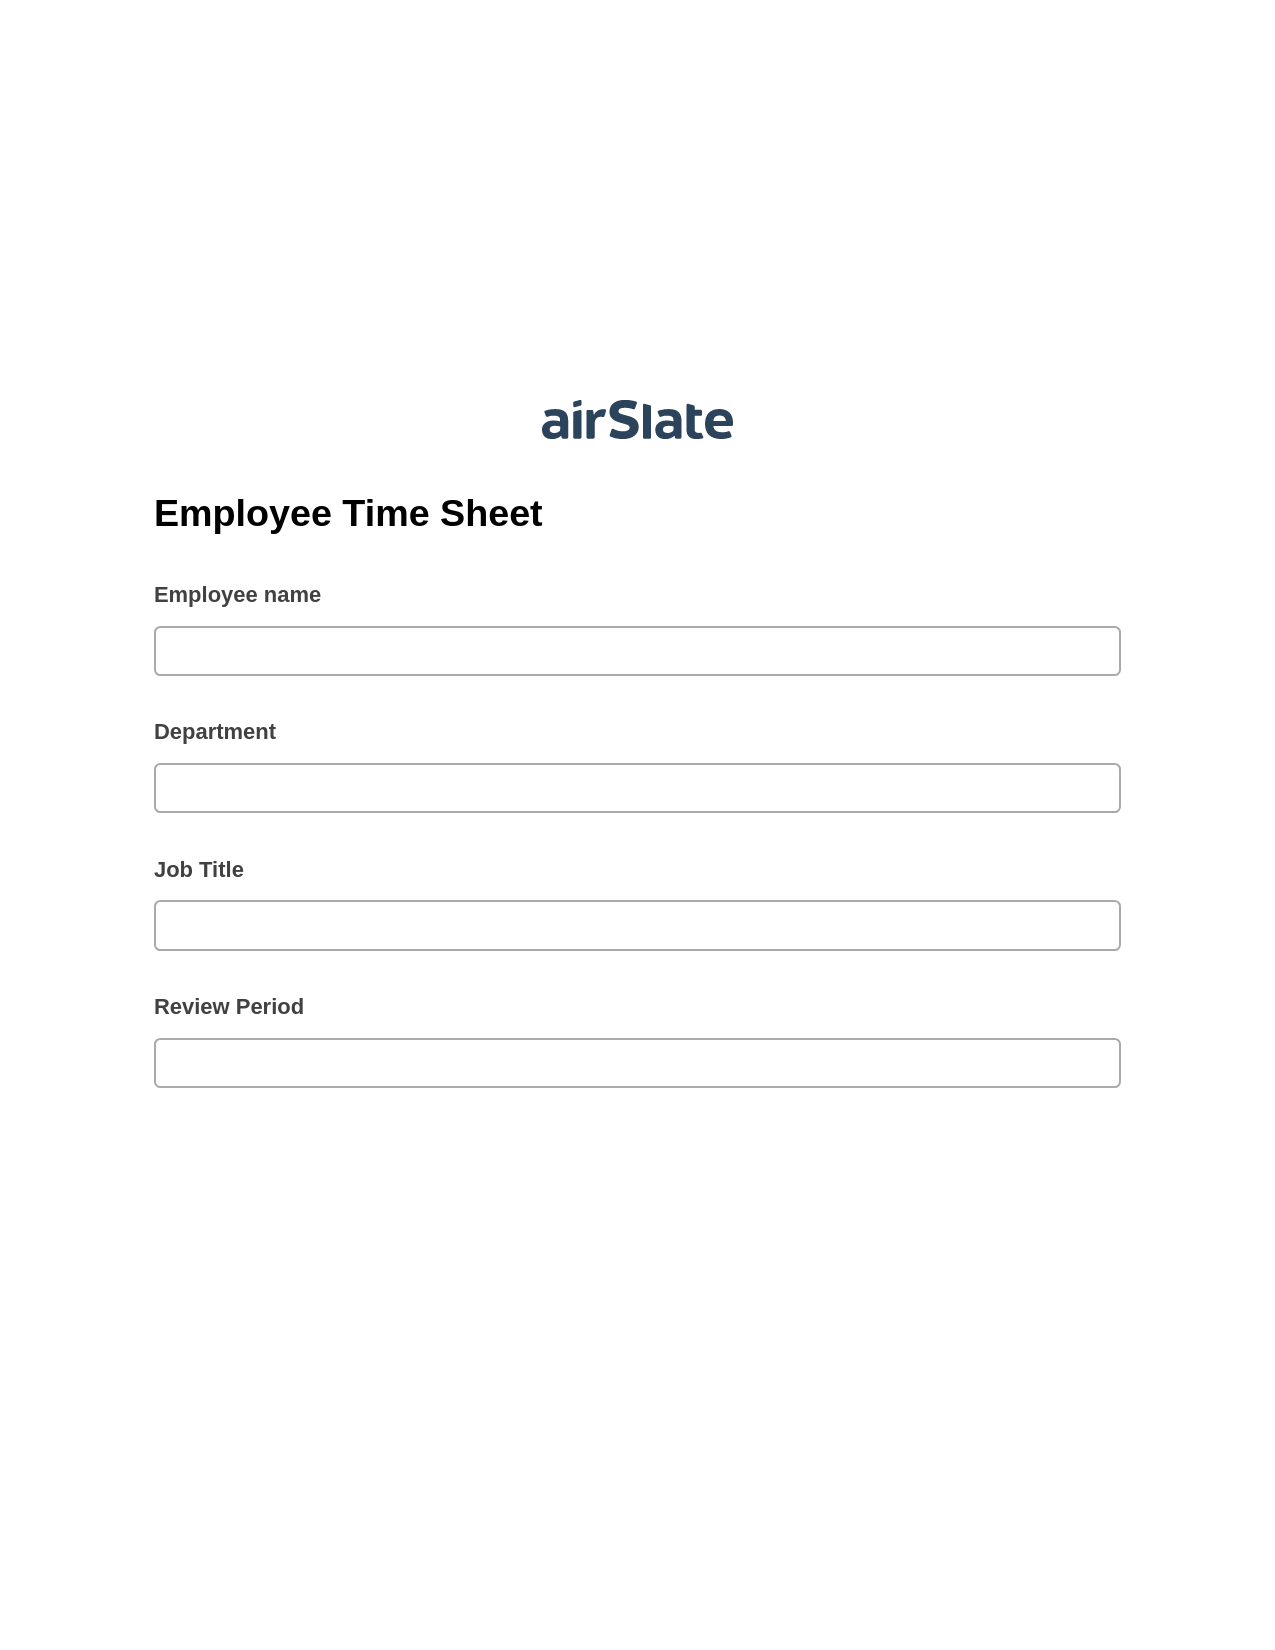 Multirole Employee Time Sheet Pre-fill Document Bot, Create MS Dynamics 365 Records Bot, Archive to SharePoint Folder Bot